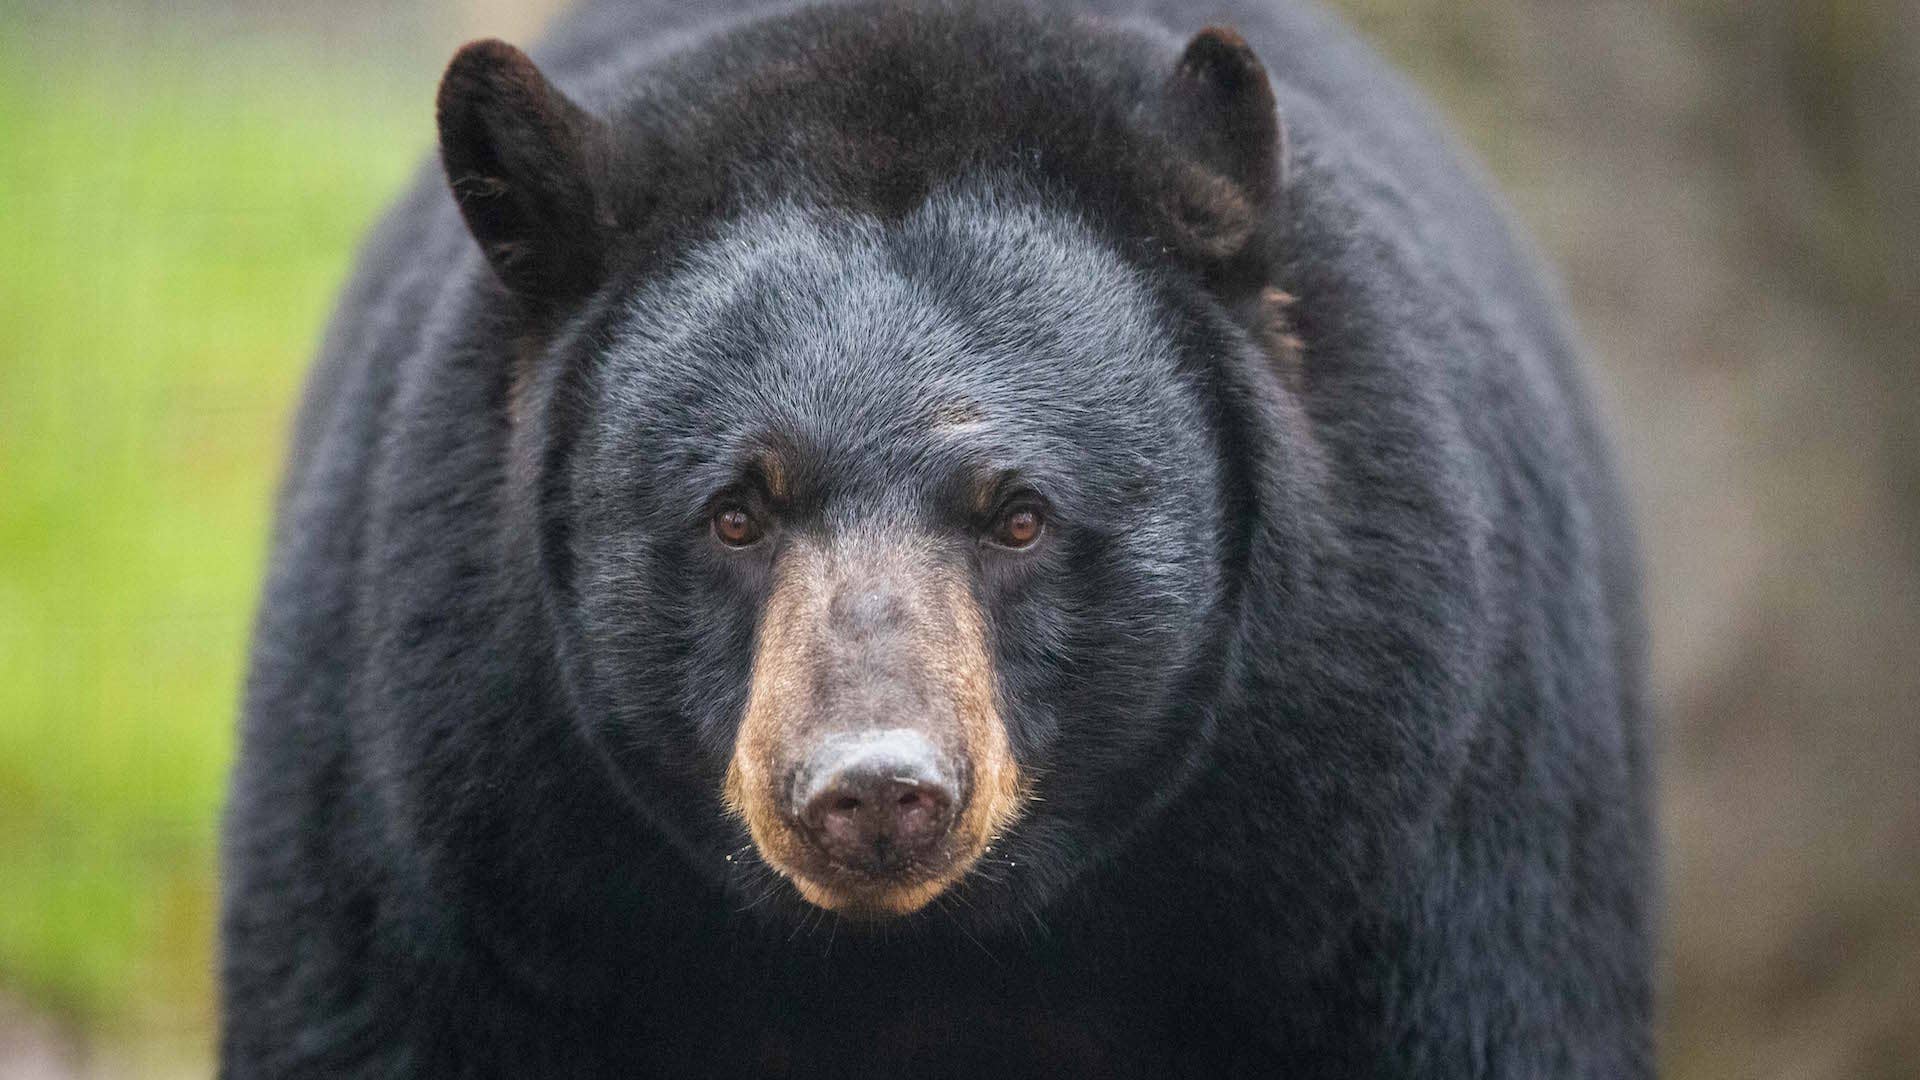 Black bear "Honey" can be found in the black bear enclosure